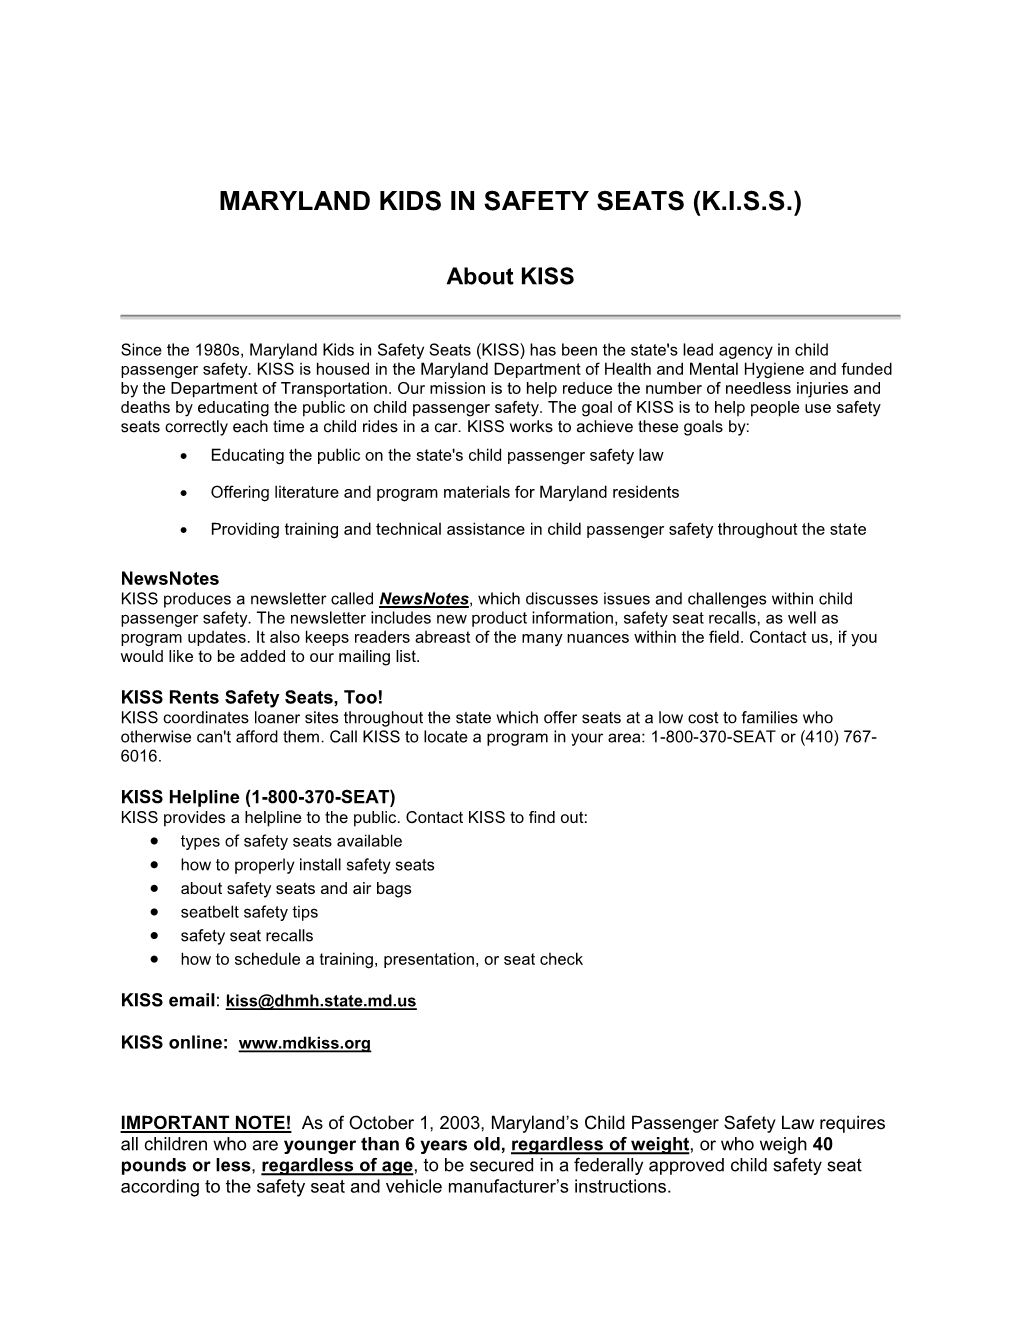 Maryland Kids in Safety Seats (K.I.S.S.)